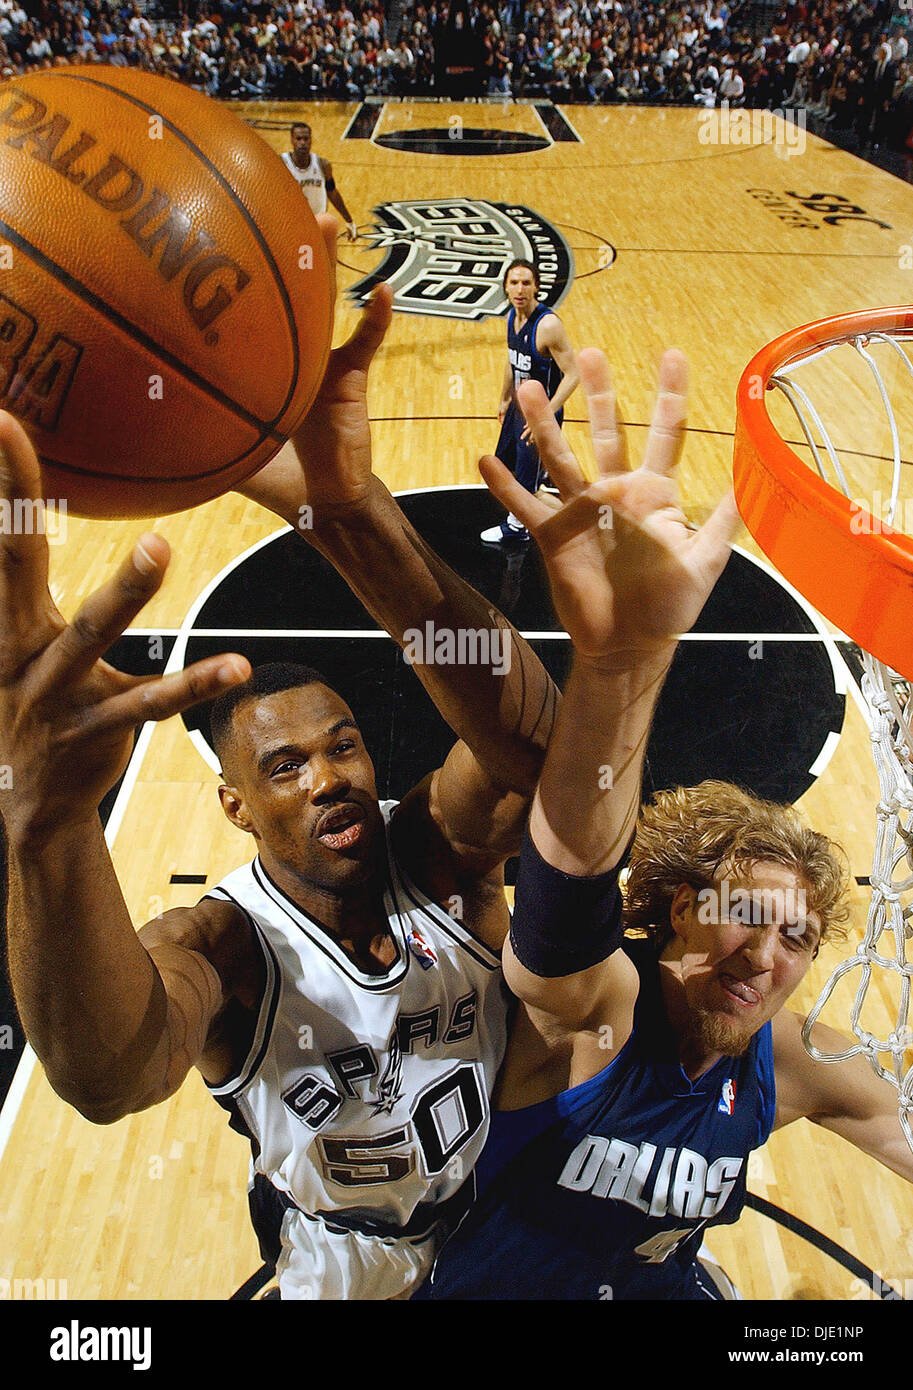 May 21, 2003; San Antonio, TX, USA; Spurs David Robinson goes for an offensive rebound against the Mavericks DIRK NOWITZKI during second half action in game two of the Western Conference Finals at the SBC Center Wednesday  May 21, 2003. Stock Photo